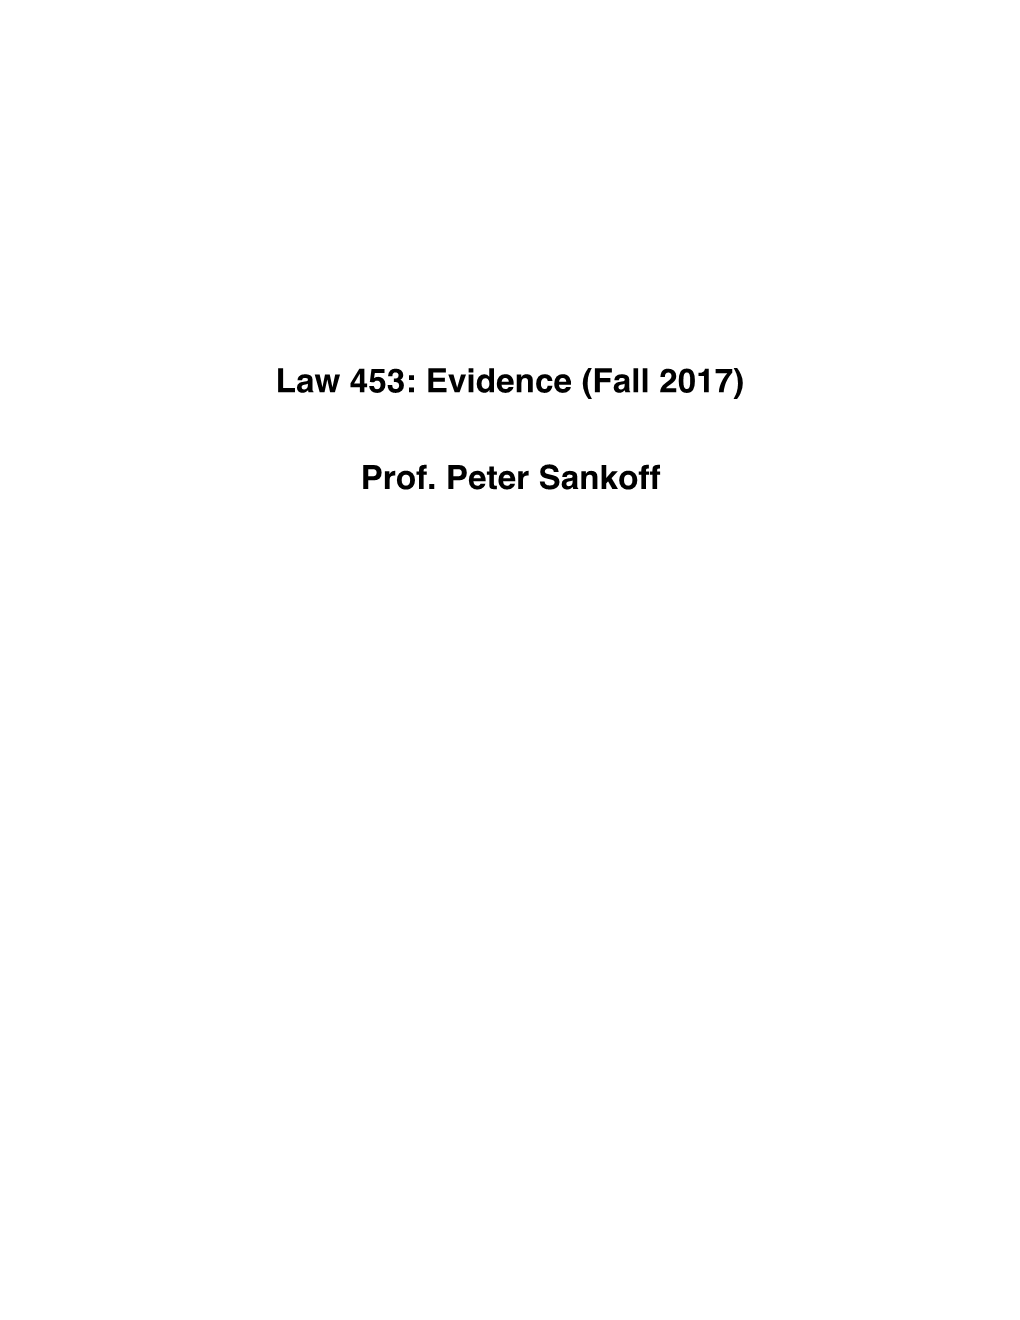 Law 453: Evidence (Fall 2017)